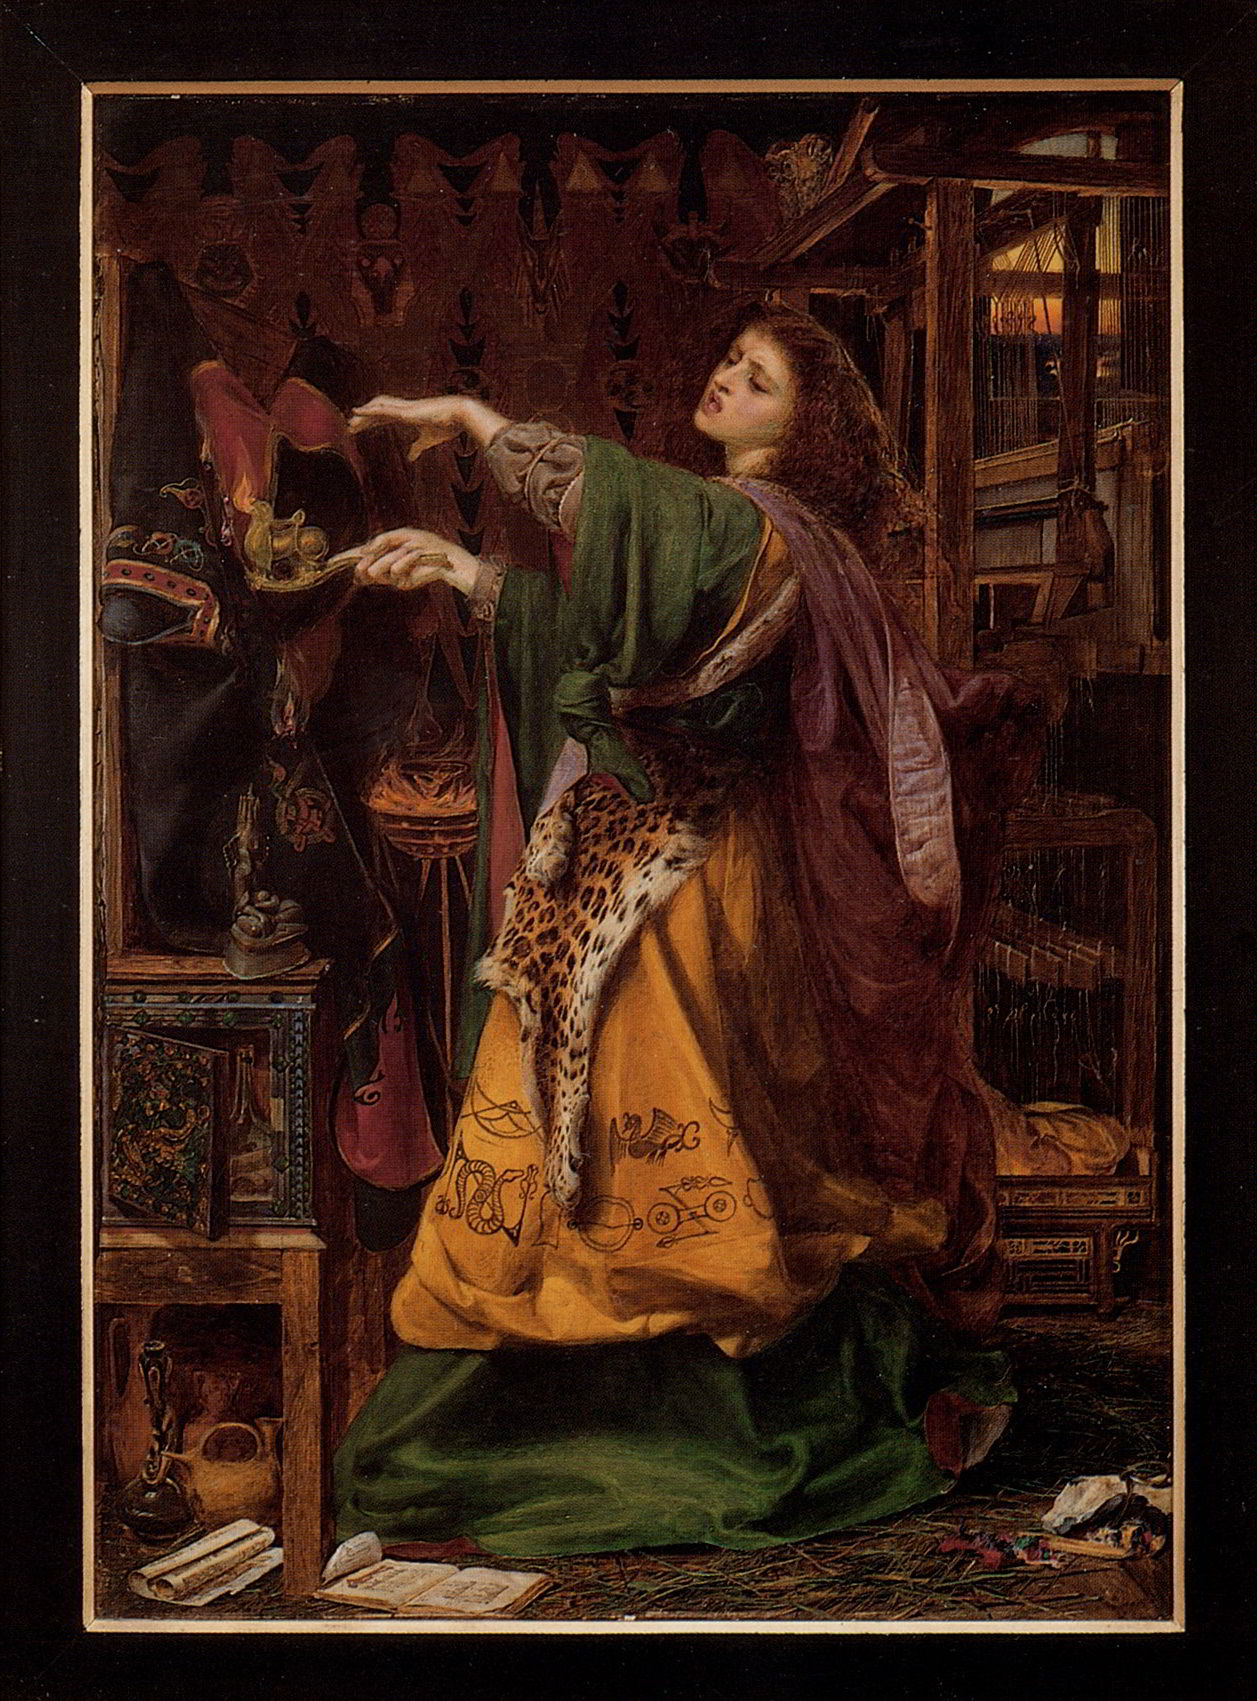 Morgan le Fay by Anthony Frederick Sandys